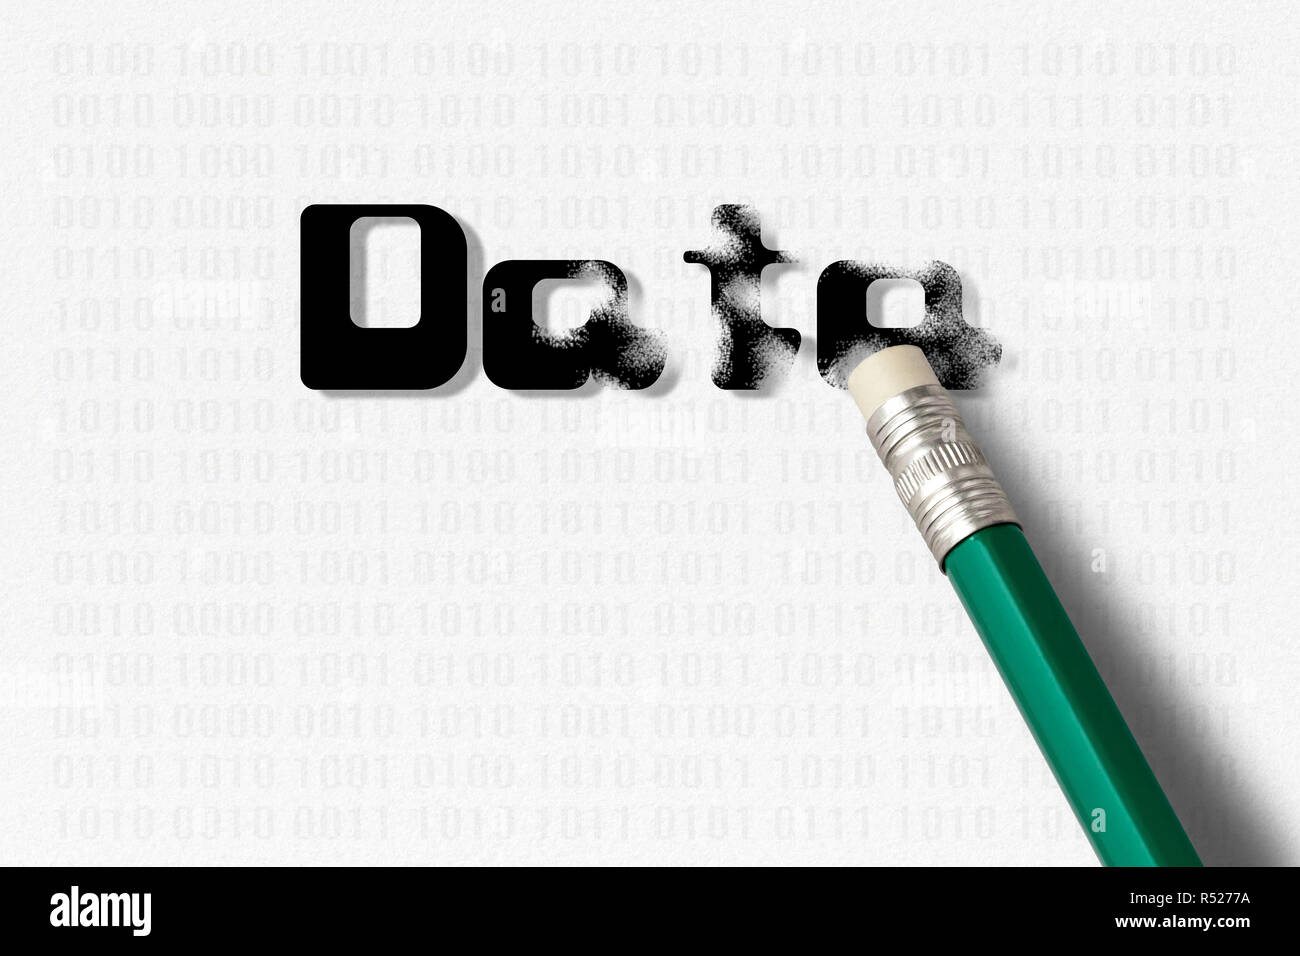 green pencil with an eraser erases the data. The concept of security, data deletion Stock Photo